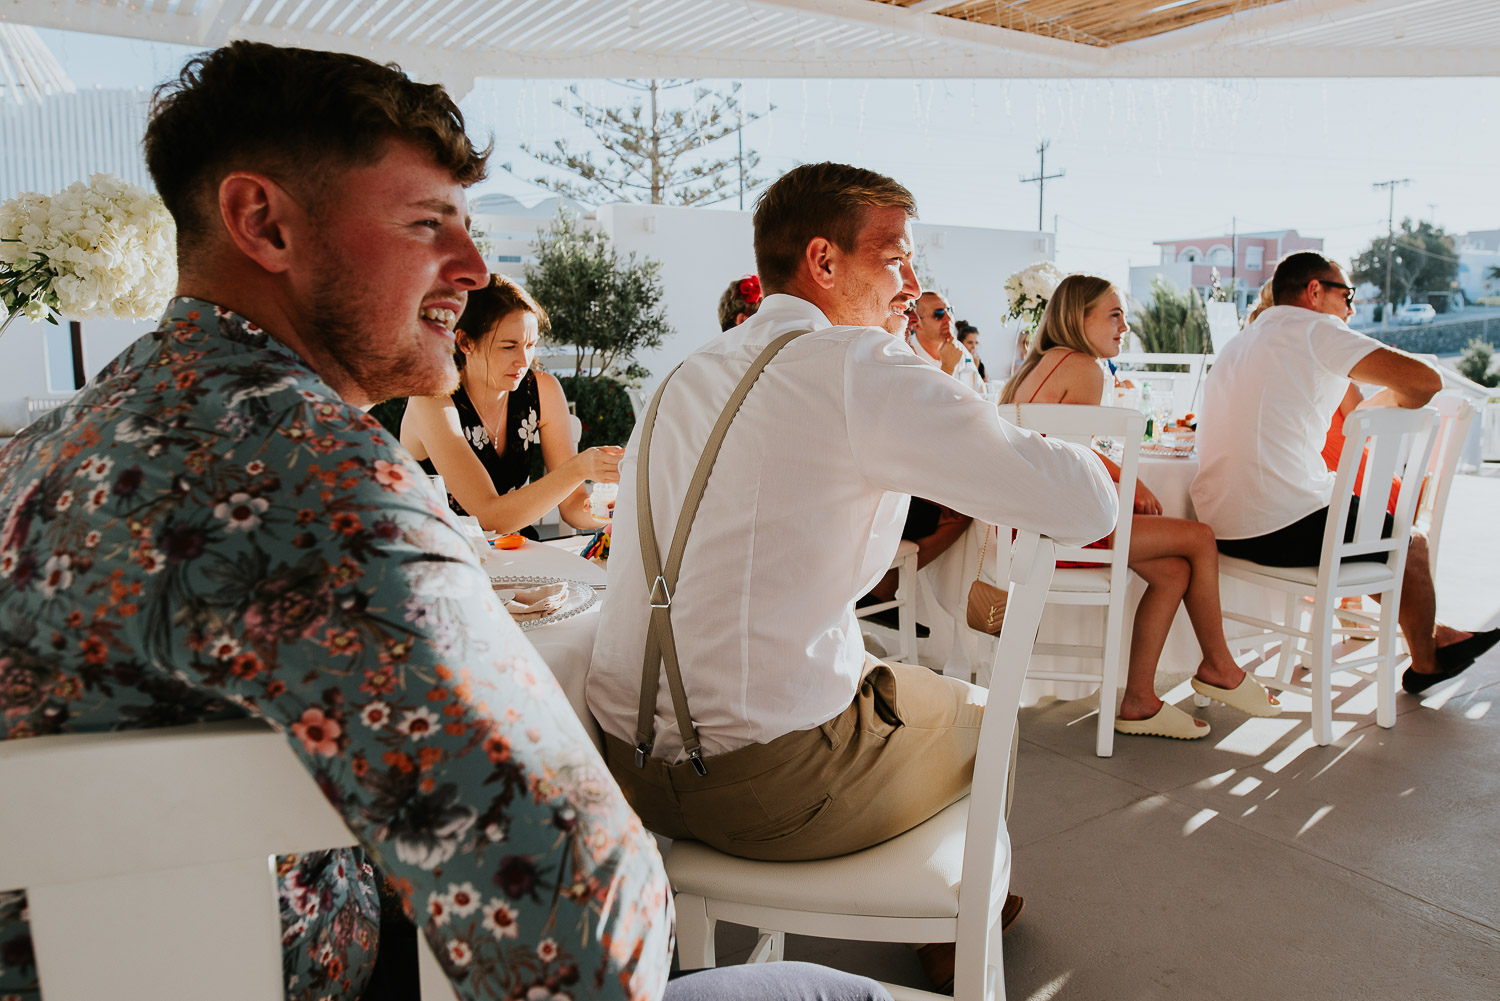 Wedding photographer Santorini: guests sat at their table as they listen to the speeches by Ben and Vesna.